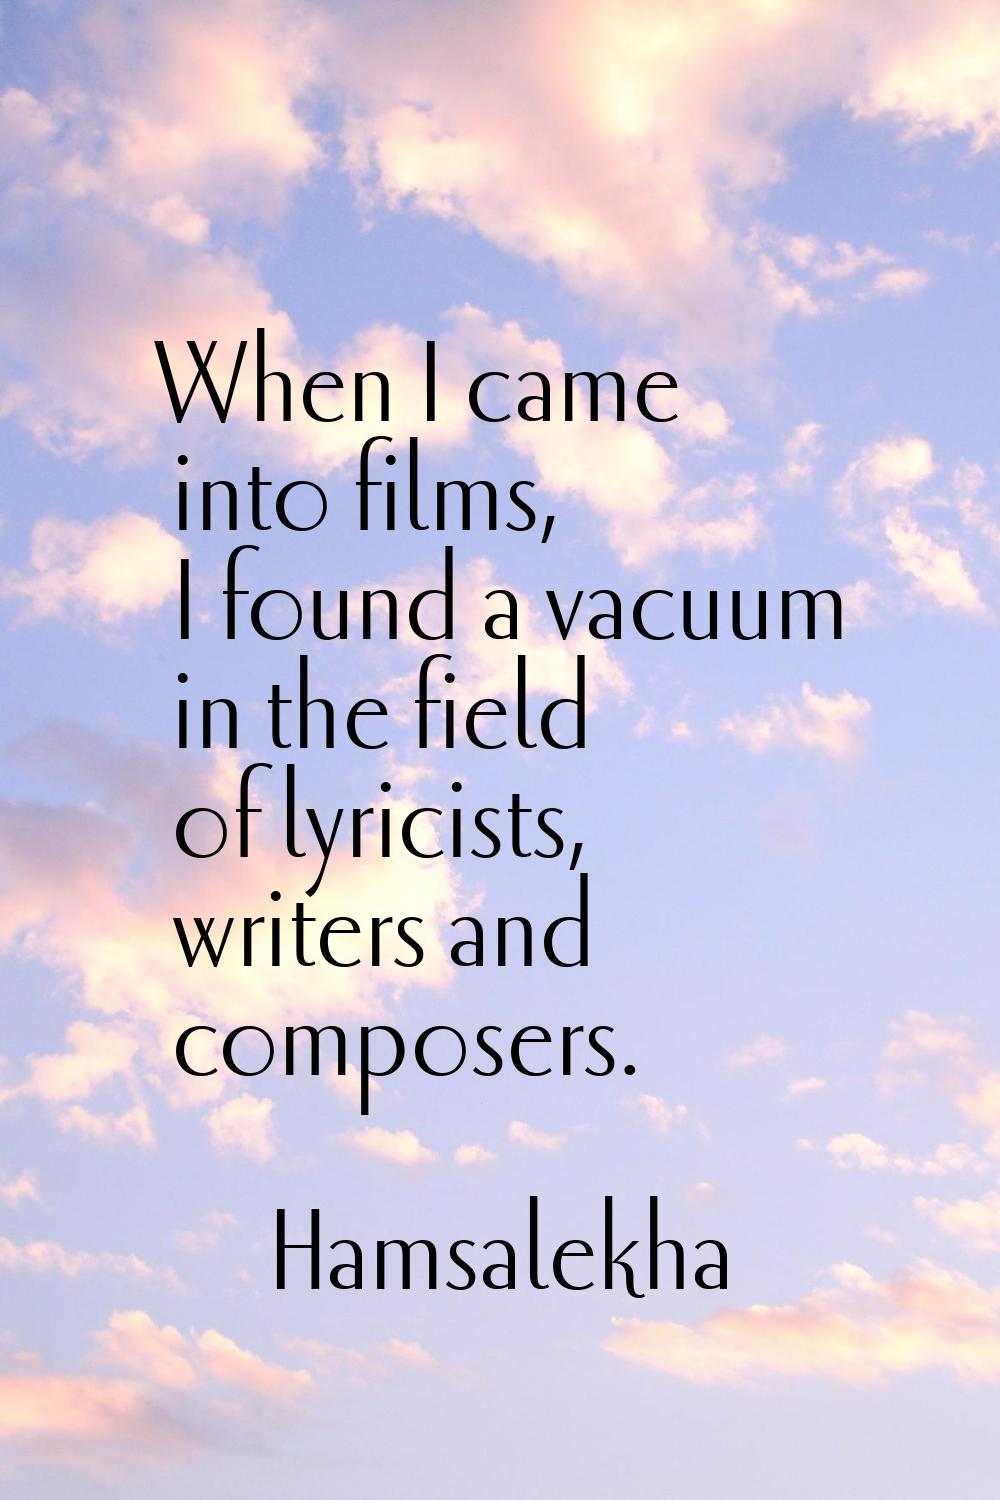 When I came into films, I found a vacuum in the field of lyricists, writers and composers.